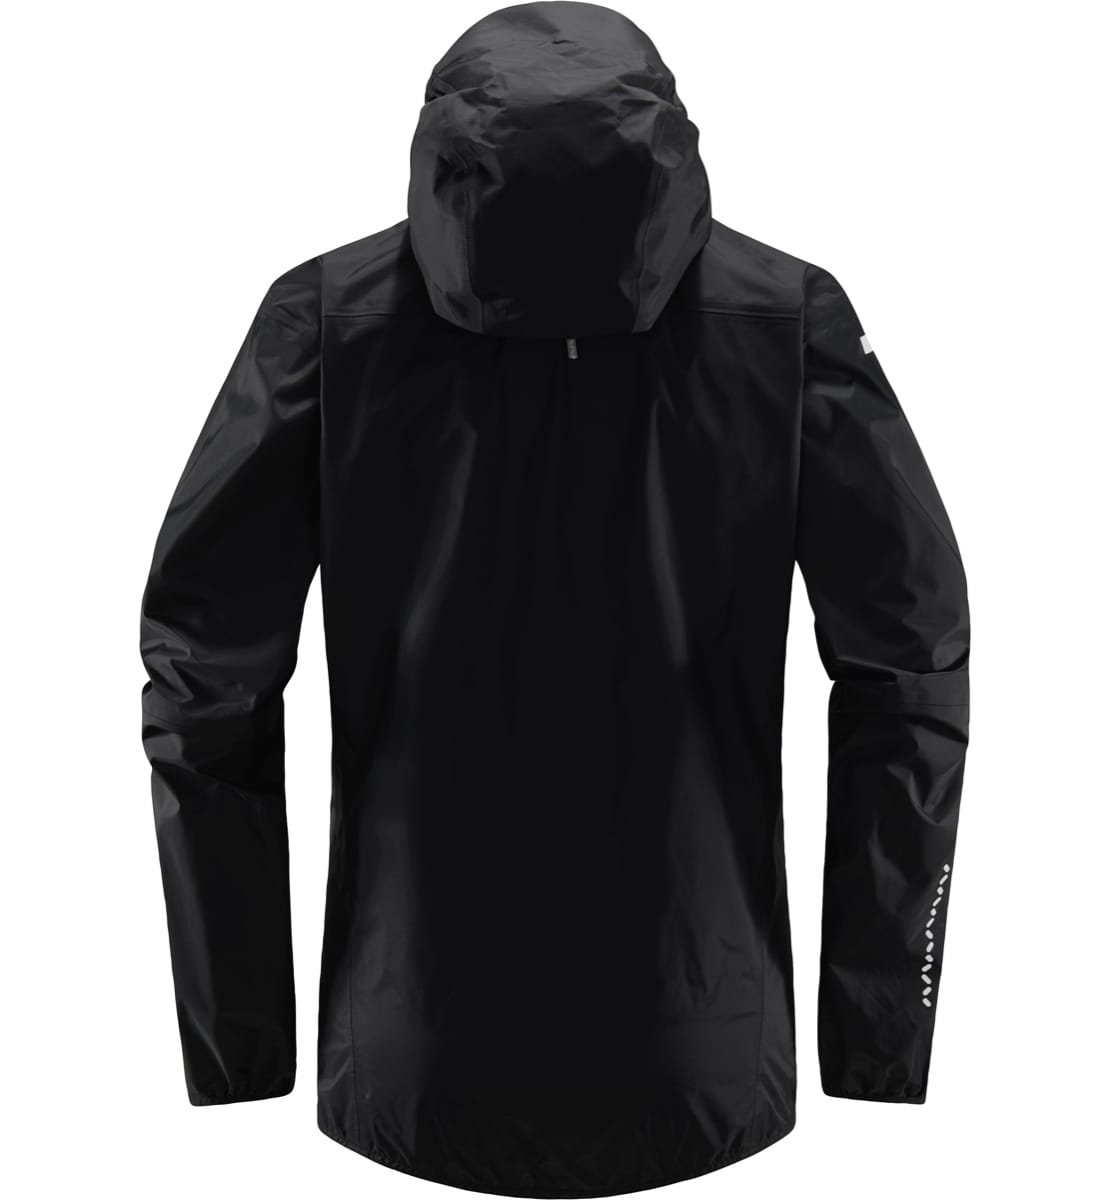 Buy Women's L.I.M Gore-Tex II Jacket Magnetite here | Outnorth